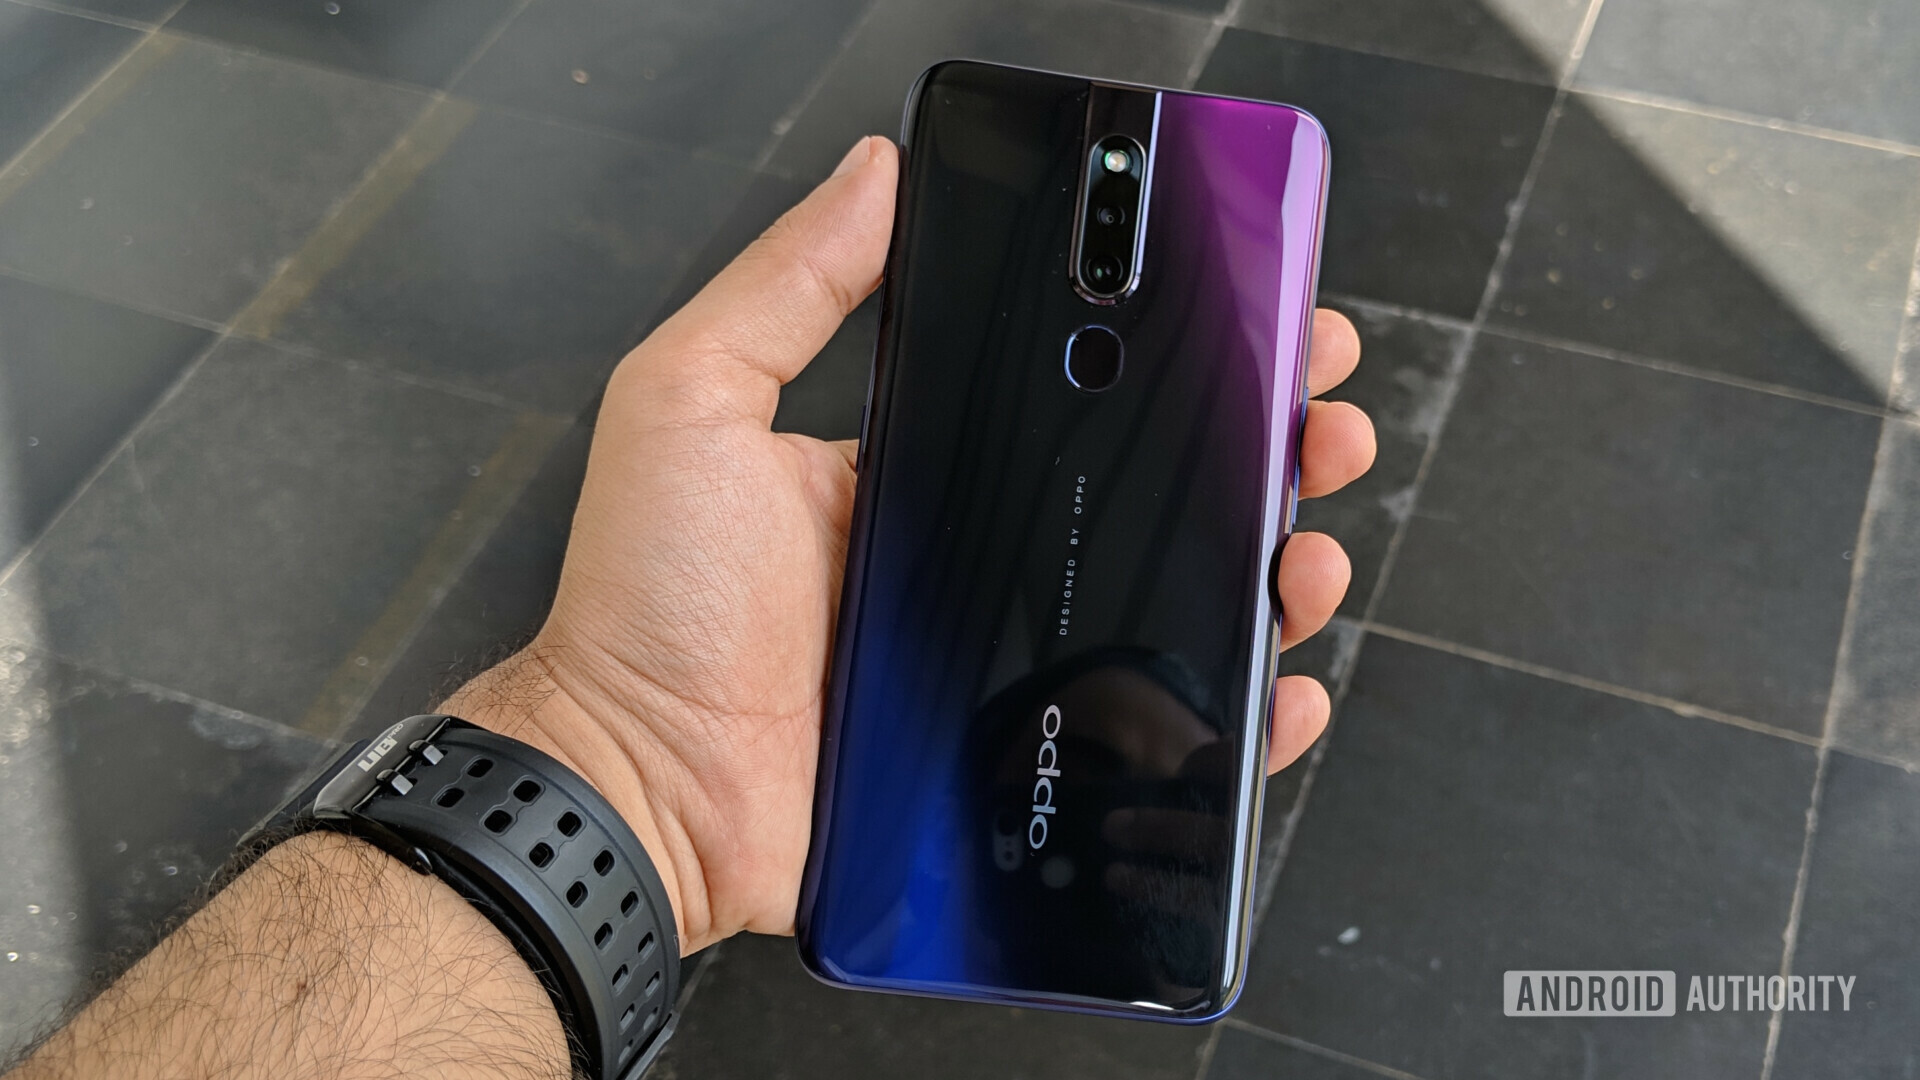 Backside of the oppo f11 pro held in a hand showing the dual cameras and fingerprint sensor.